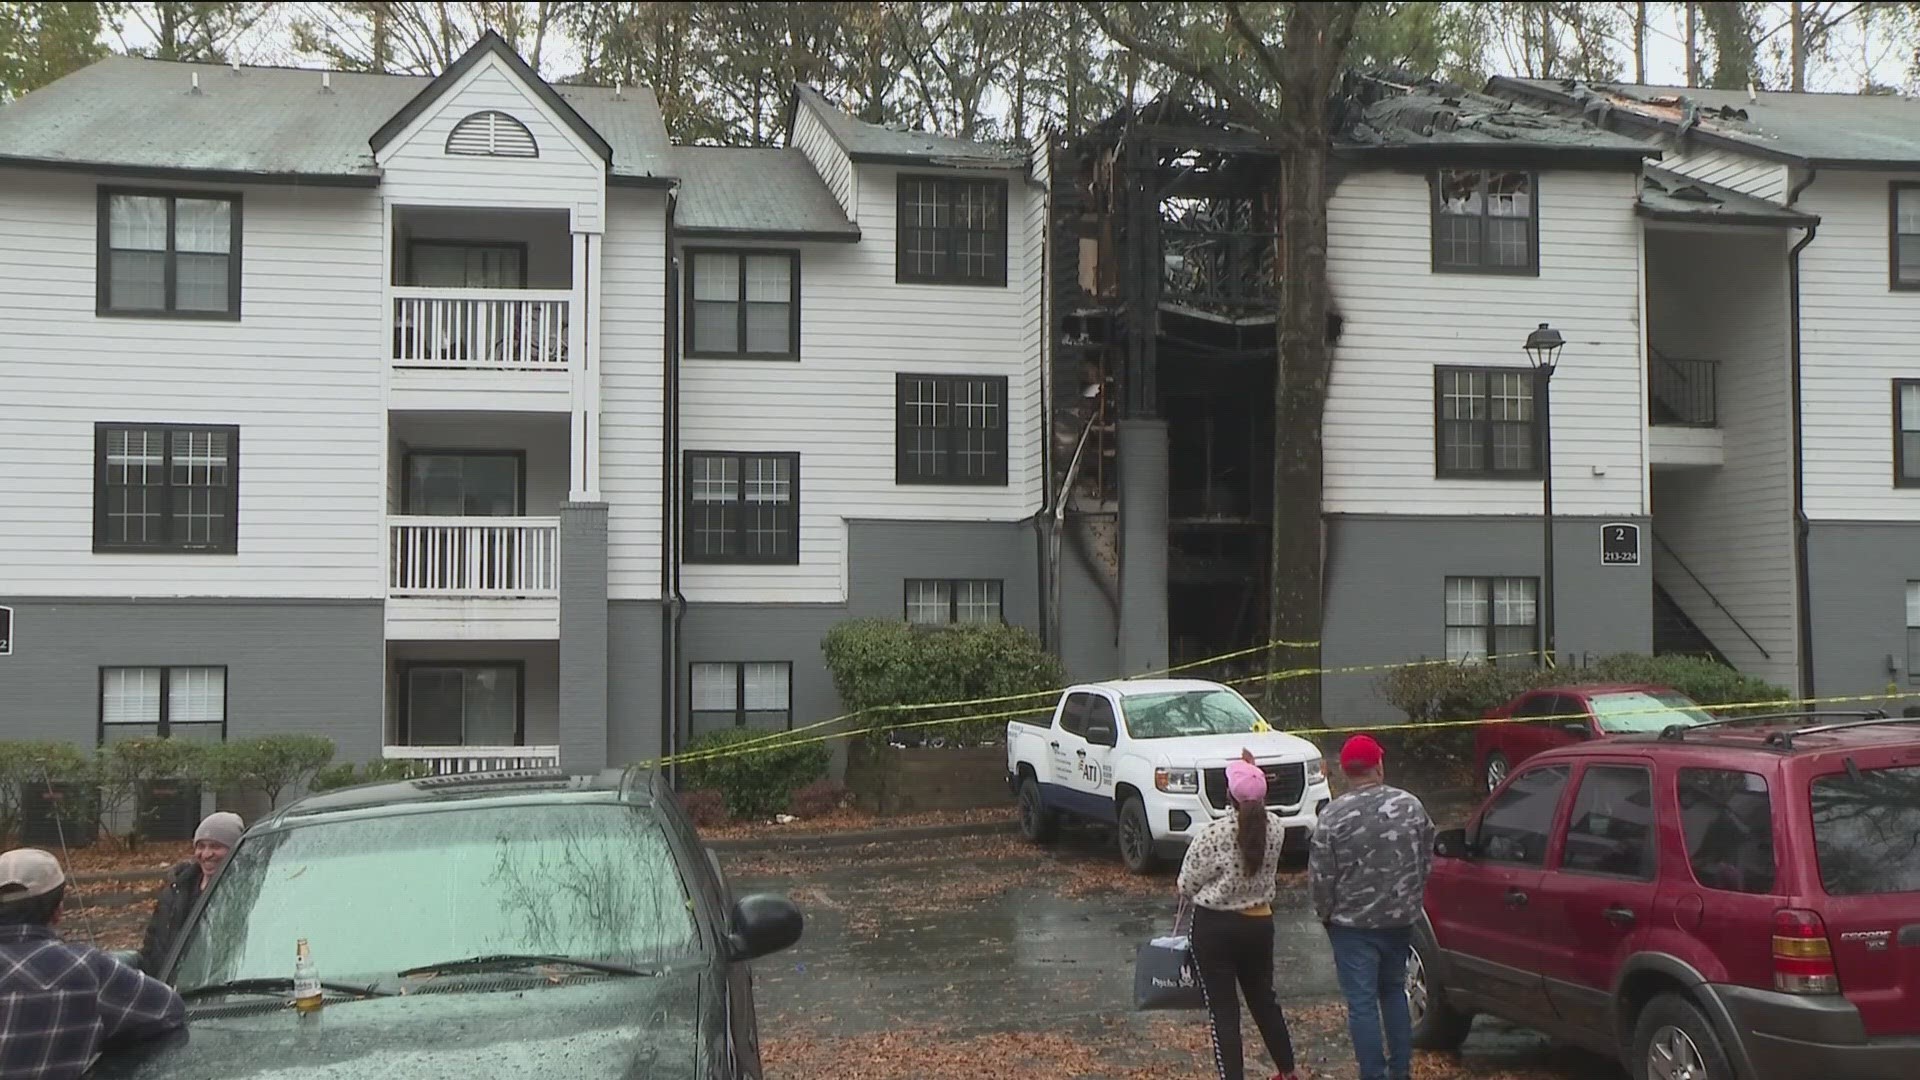 There were 73 people displaced following the fire, according to the Red Cross, but DeKalb Fire said no one was injured, and pets were also rescued.